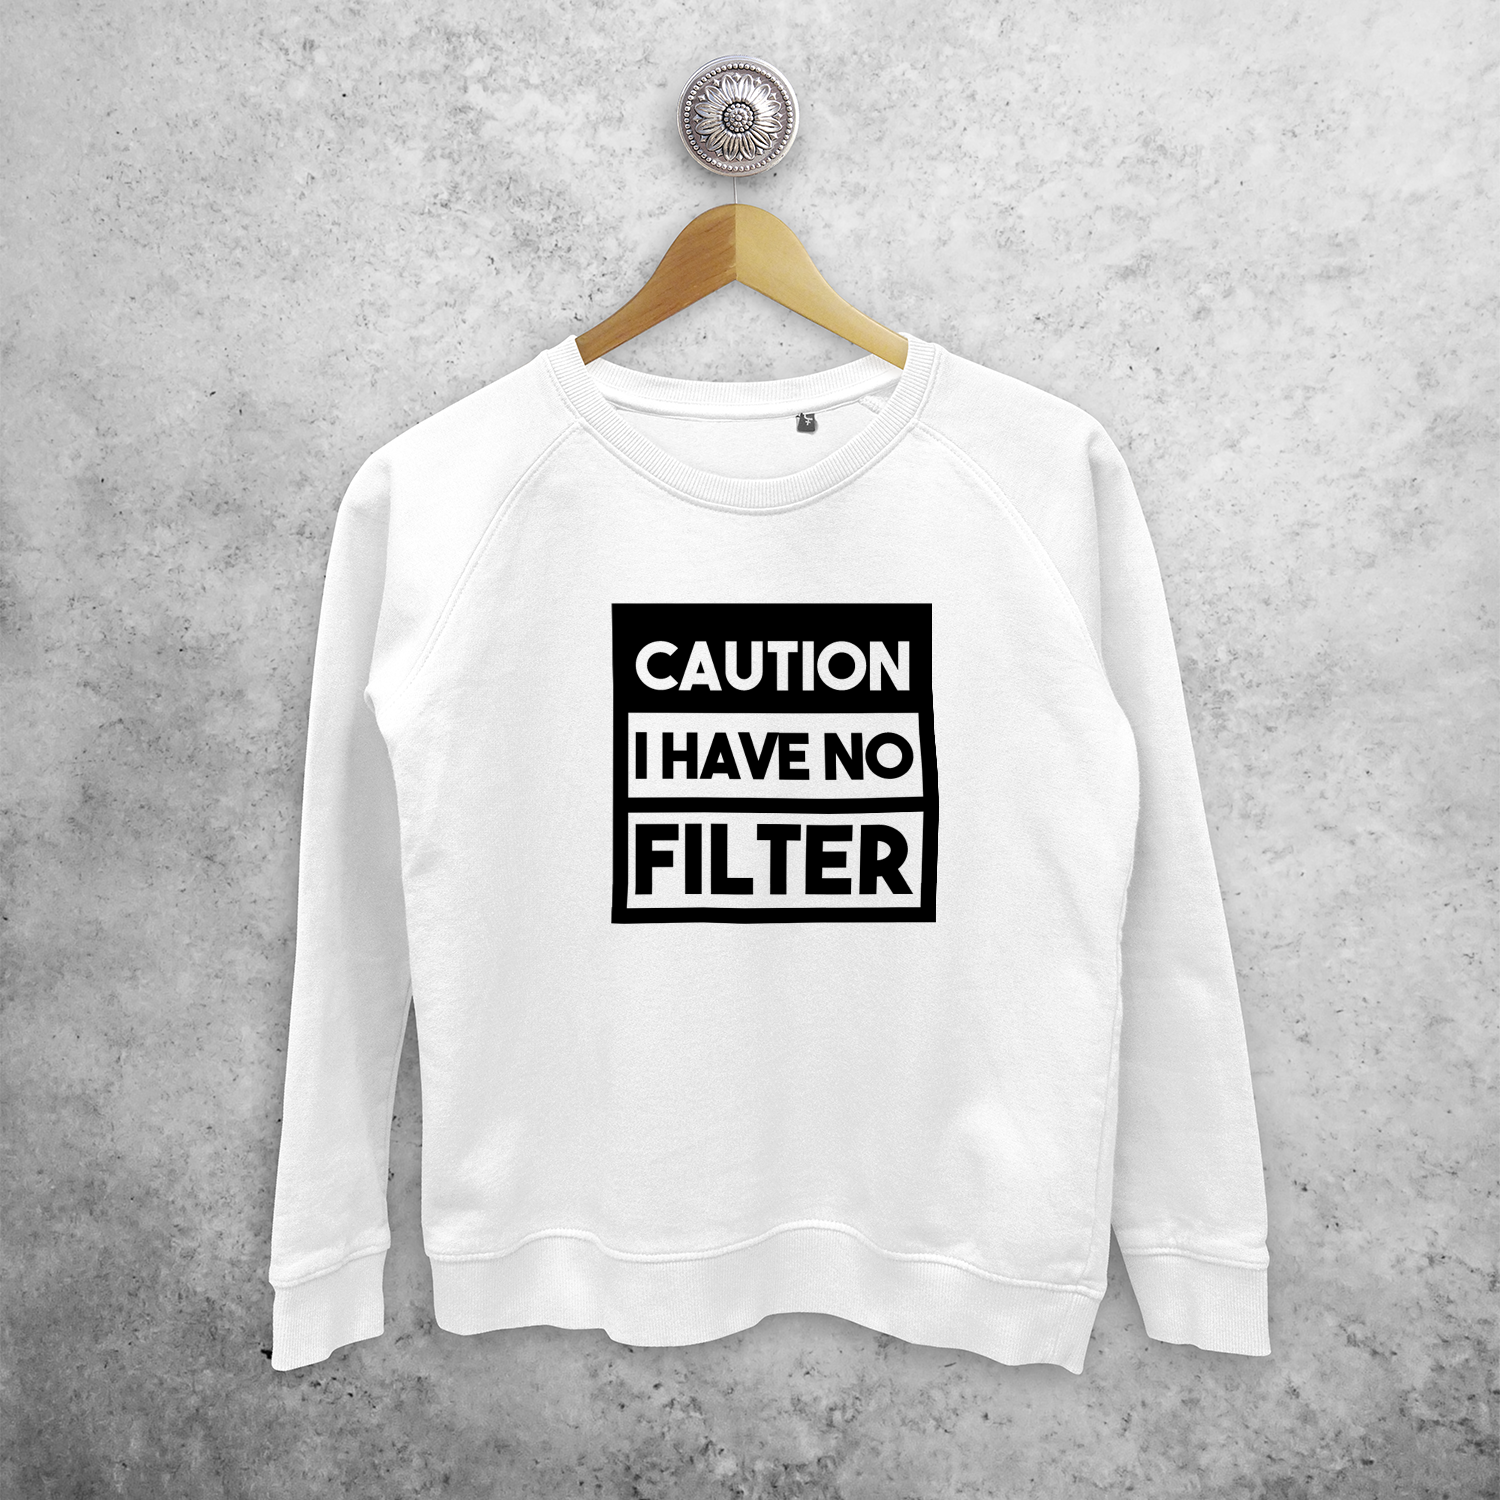 'Caution: I have no filter' sweater